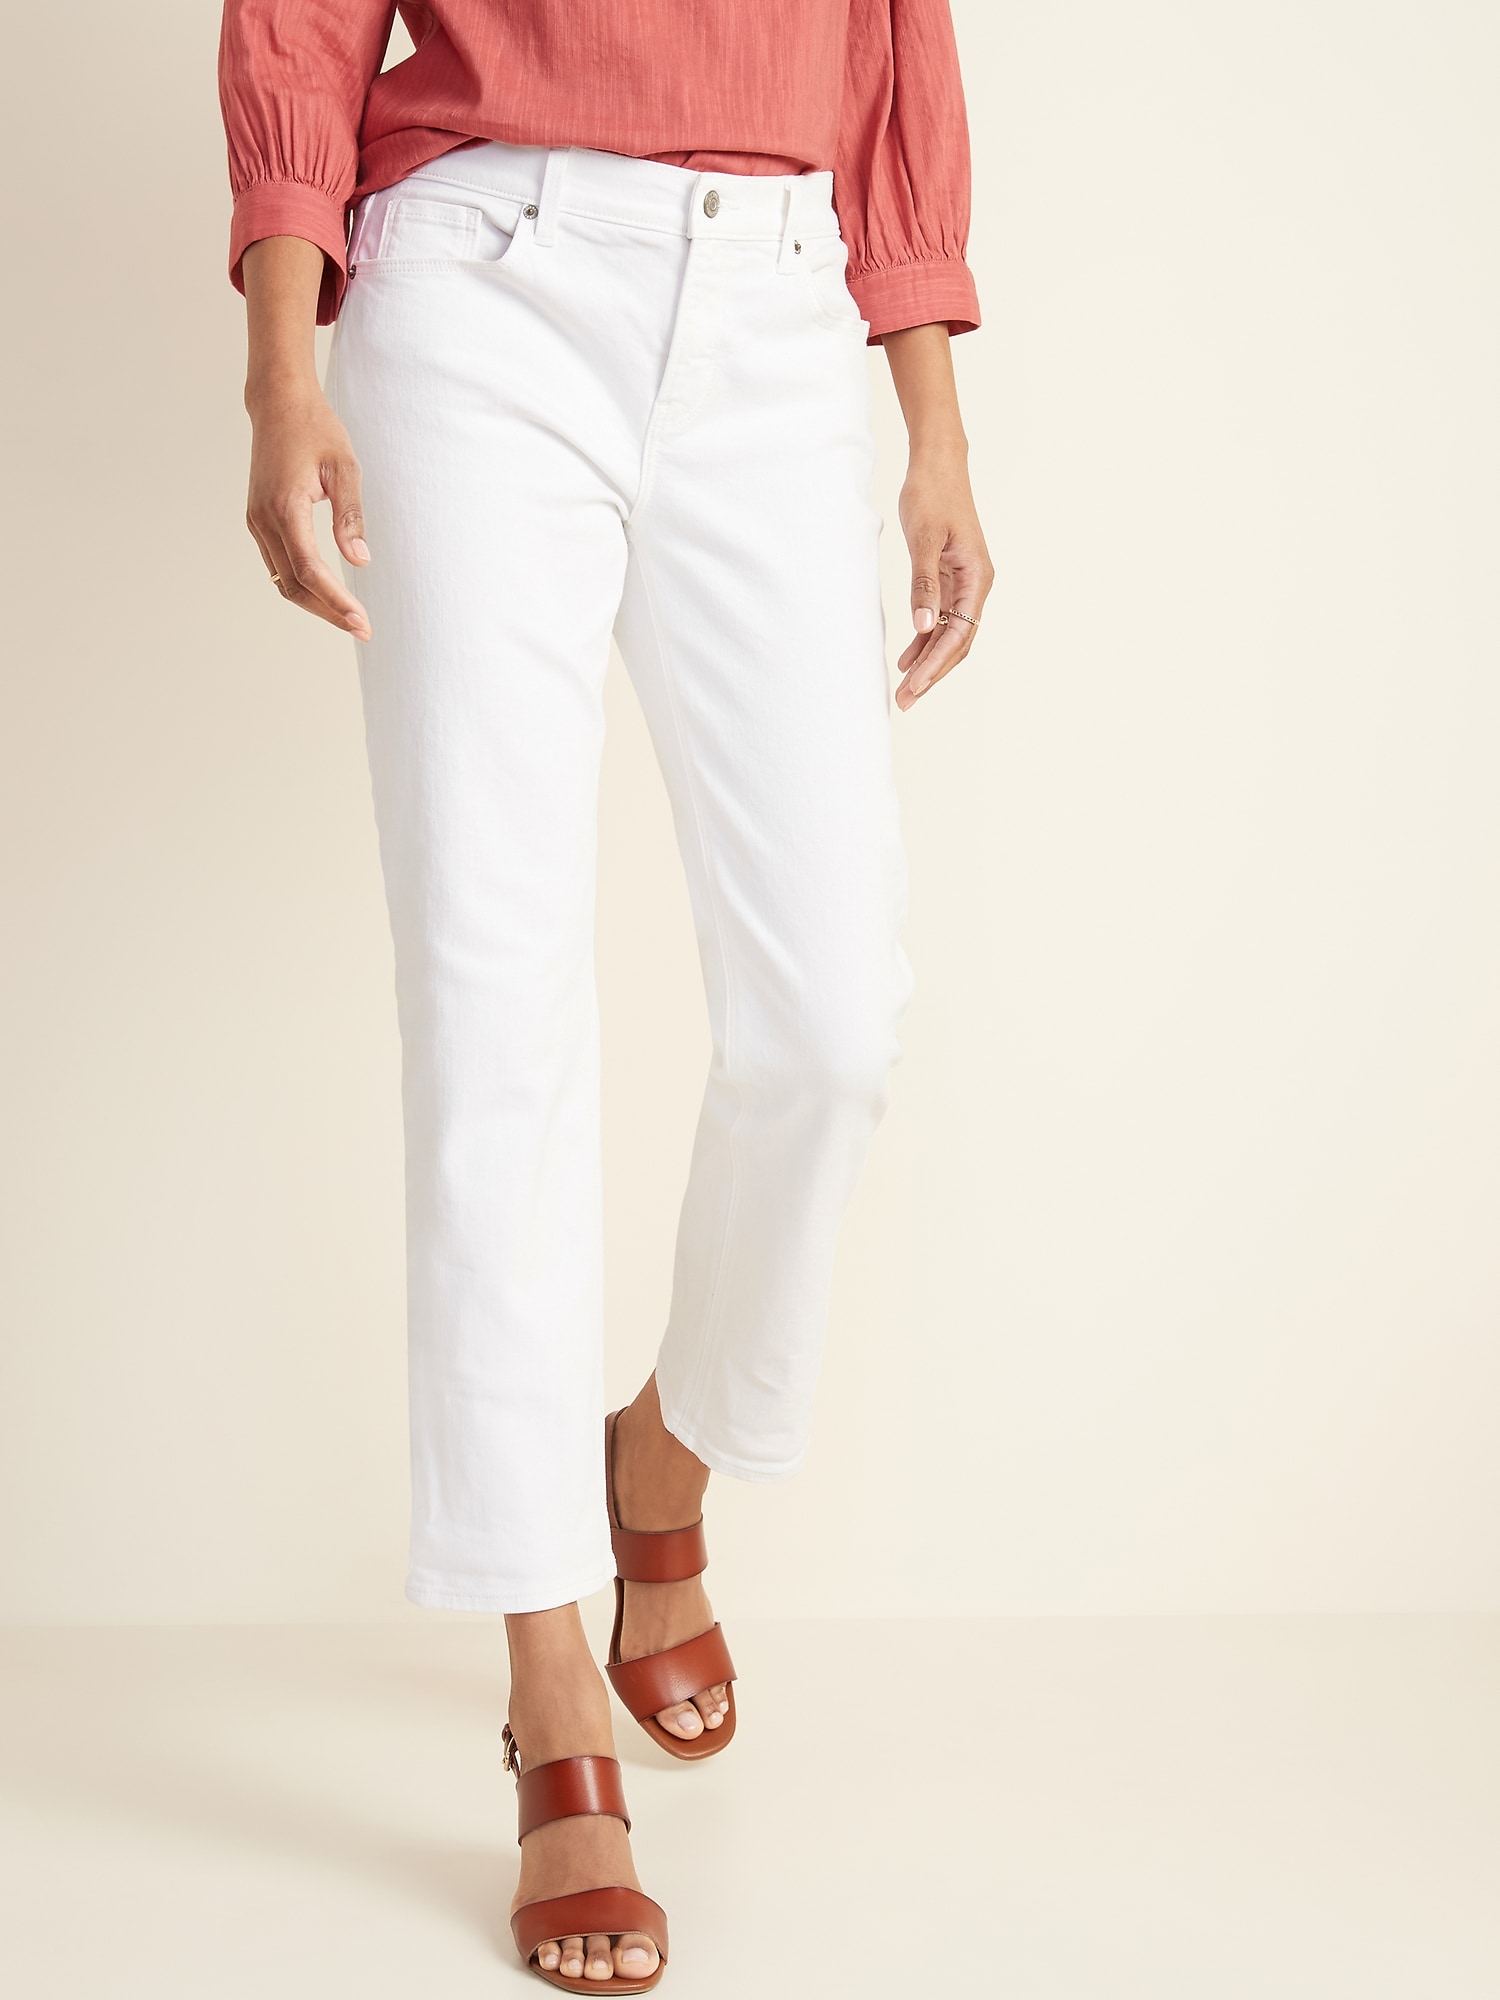 white straight jeans womens